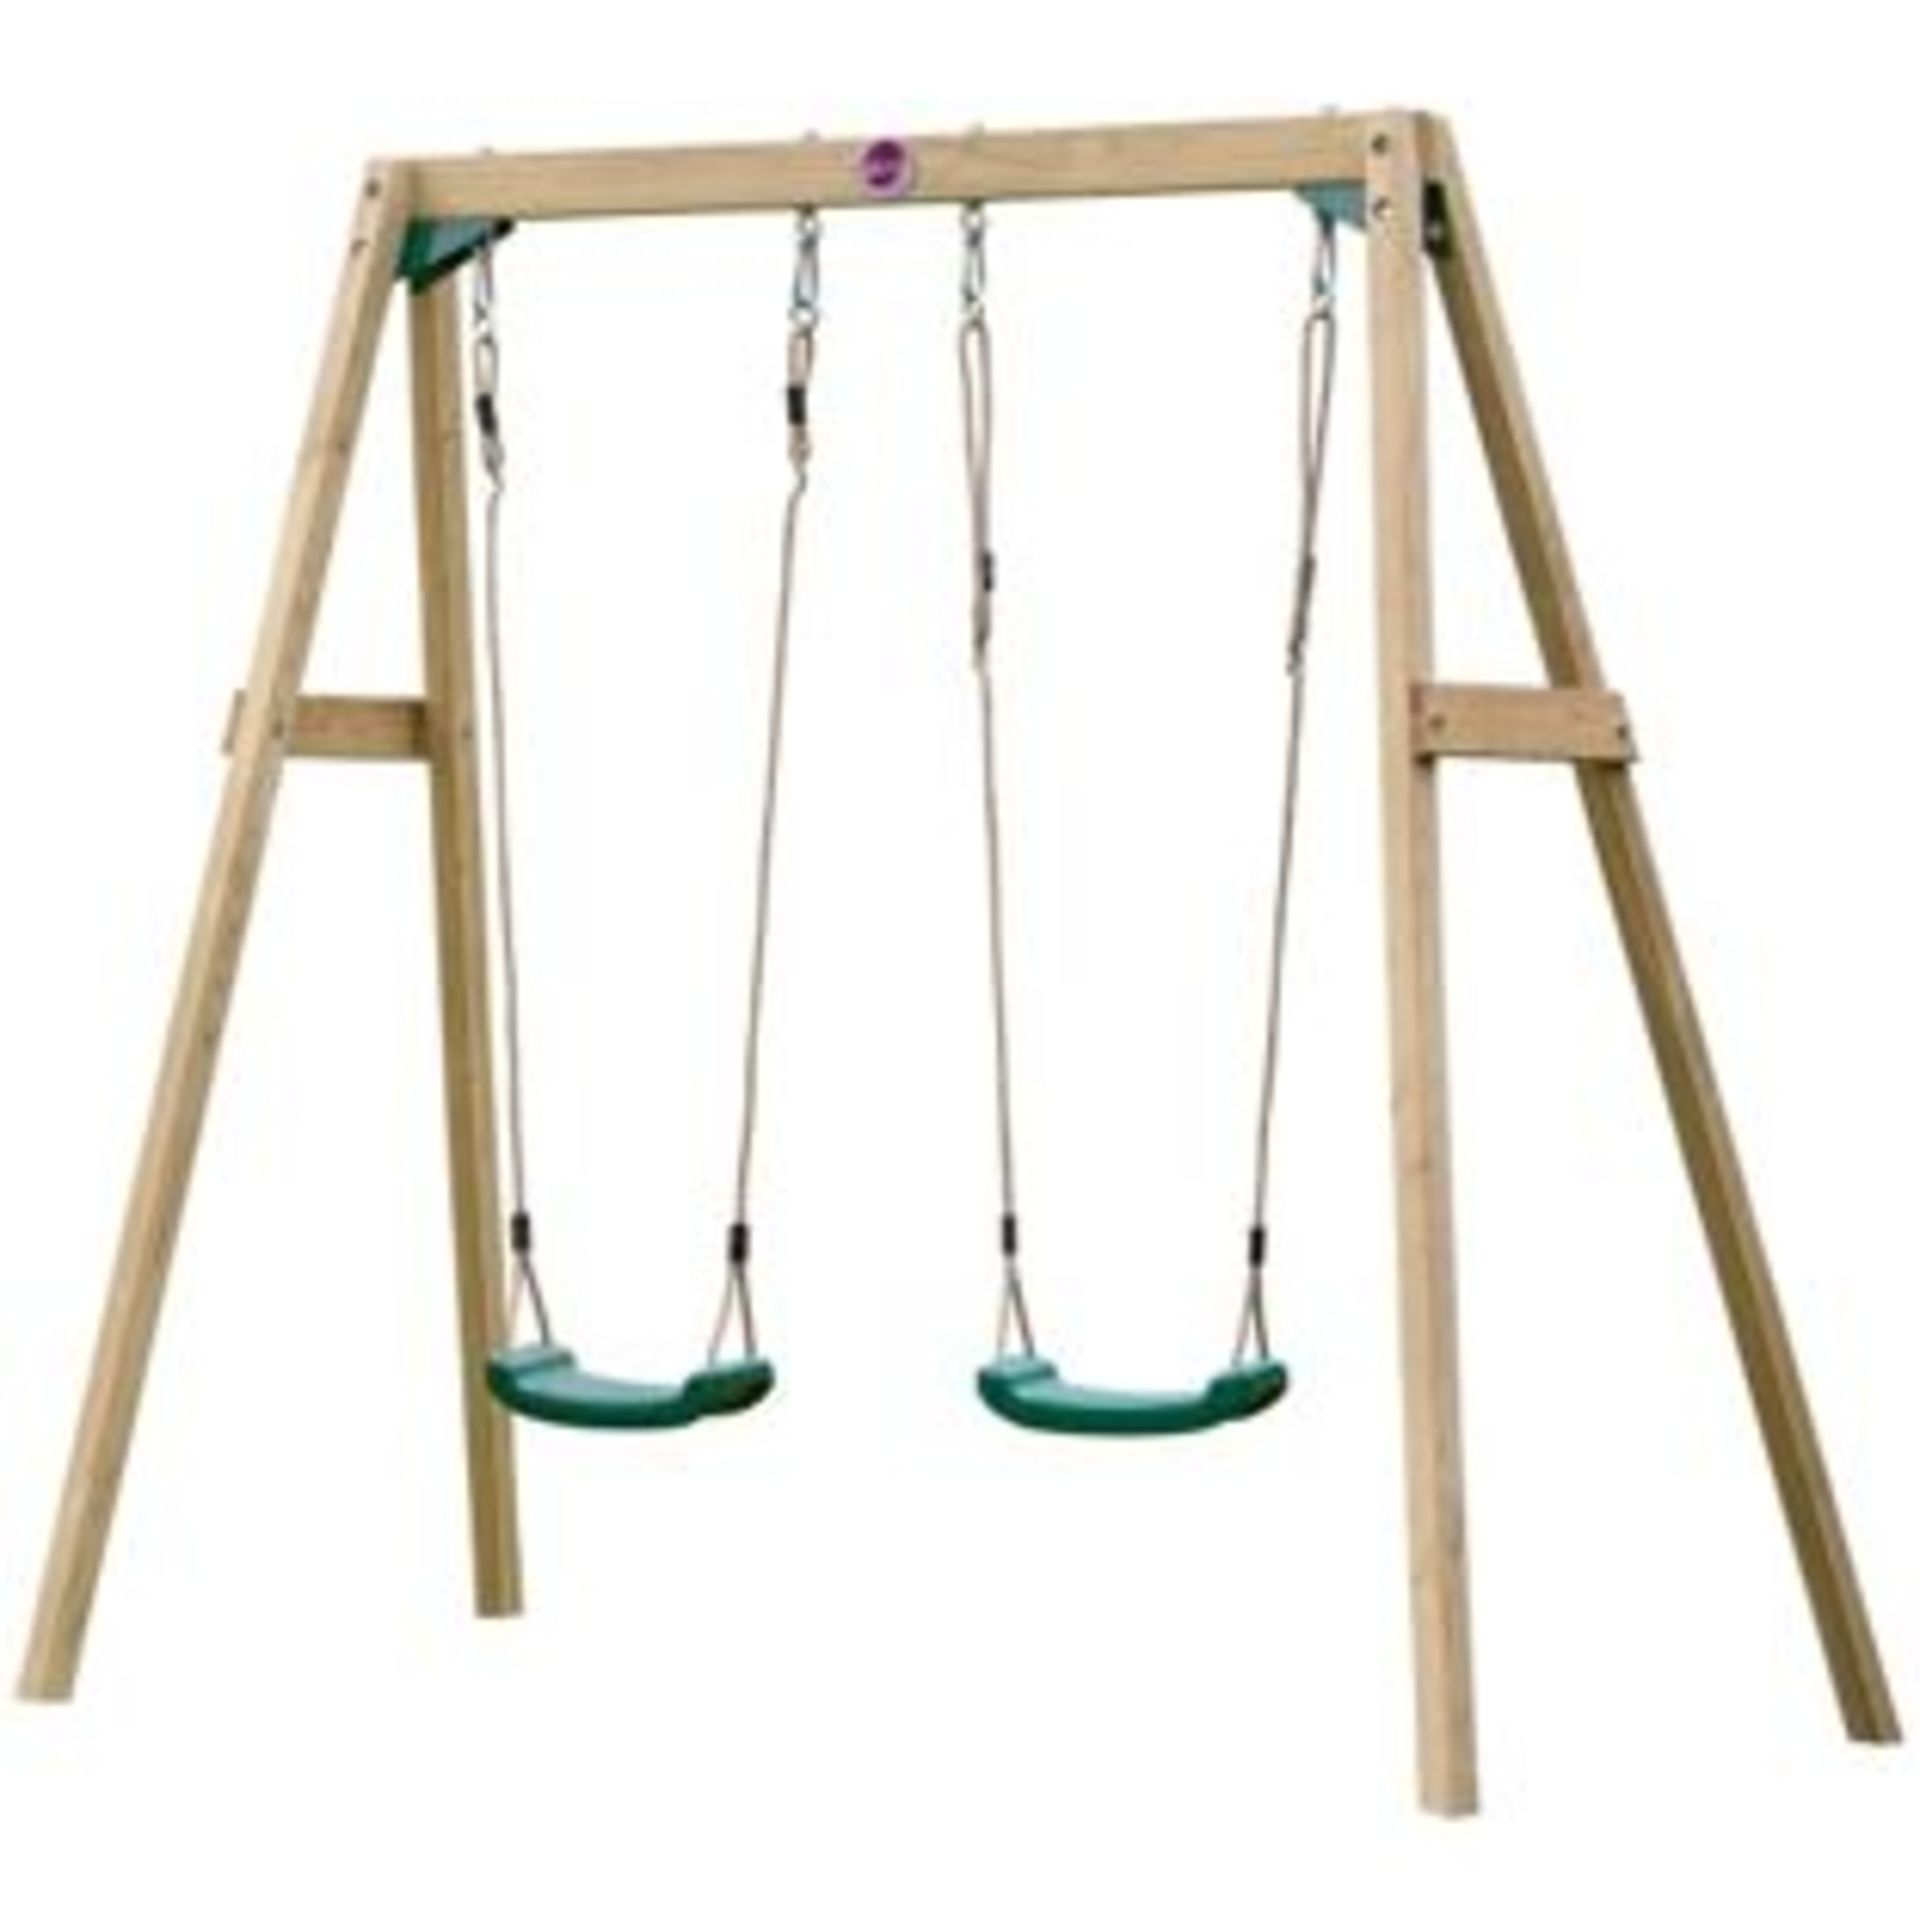 1 x Plum Wooden Double Swing Set. RRP £199.99. Double the seats for twice the fun! Children will - Image 4 of 5